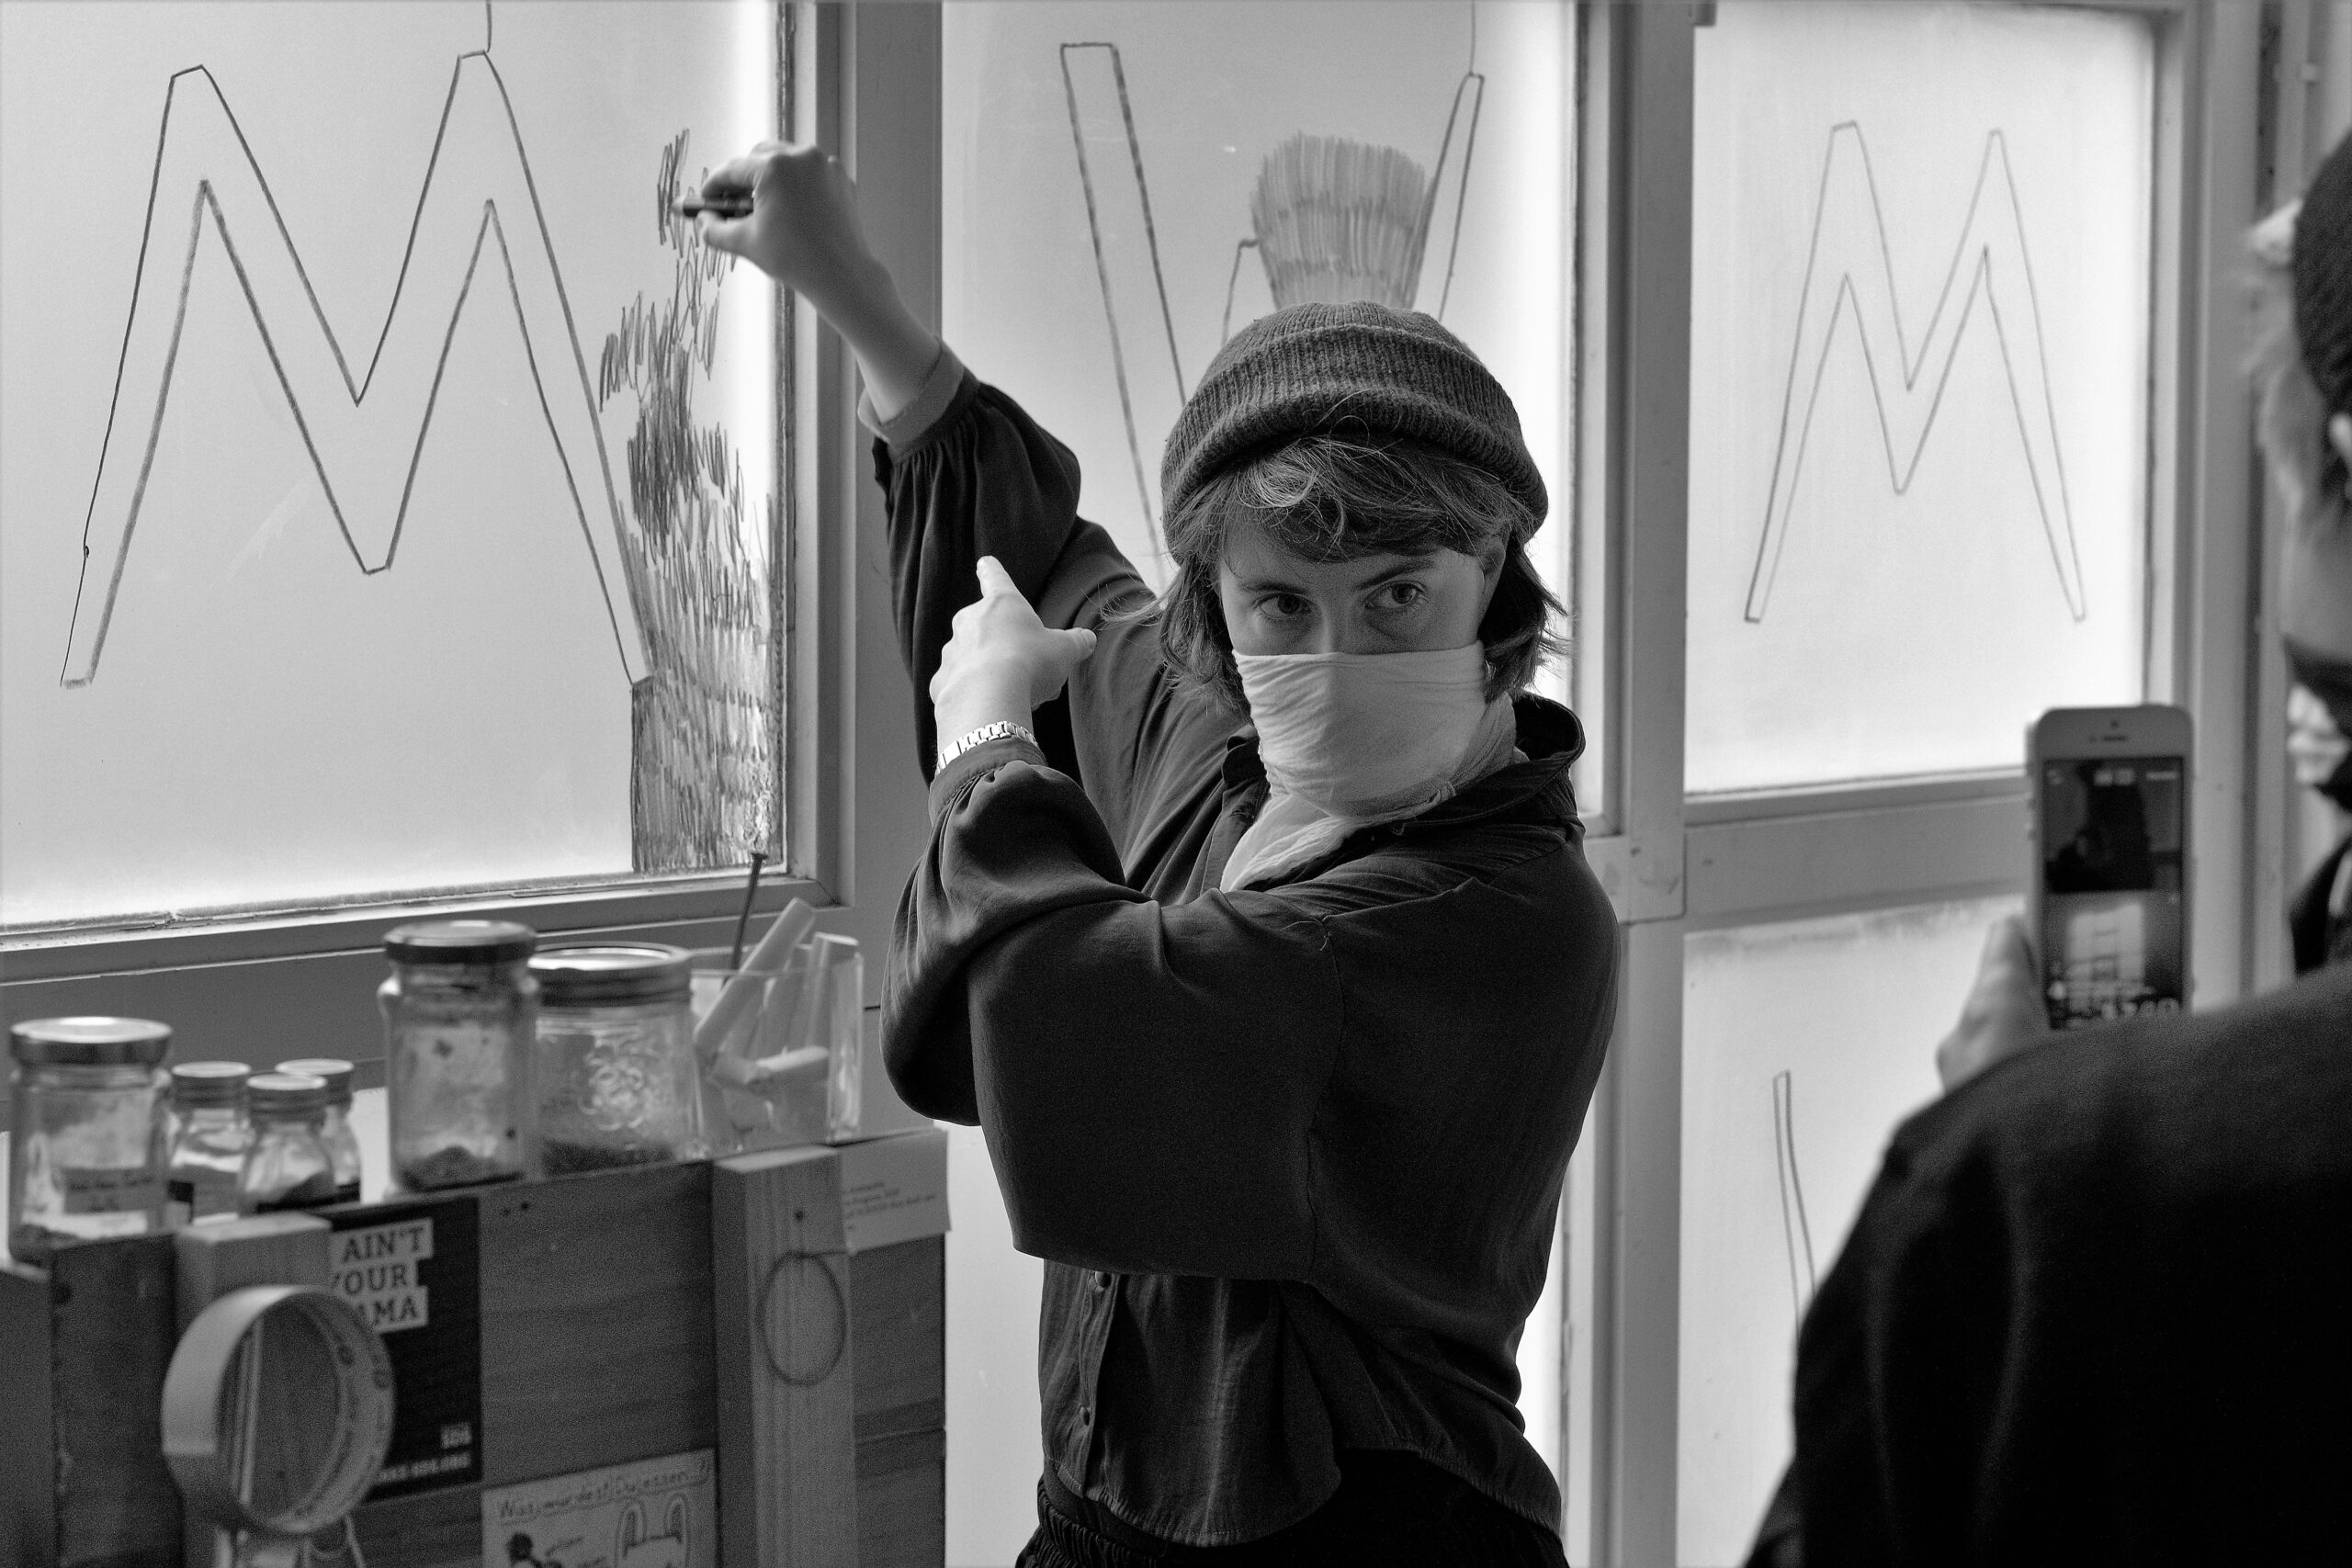 picture shows Marie aka Luis performing blù at their graduation show M. Luis is holding a blù wax pen with their right hand blind drawing lines on window glass, to frame the left out letter M in the middle of the window while facing to their left side where their performance fighter Izzy is standing, watching while holding a phone which is live streaming this action.

picture taken by Martin Hoffmann 